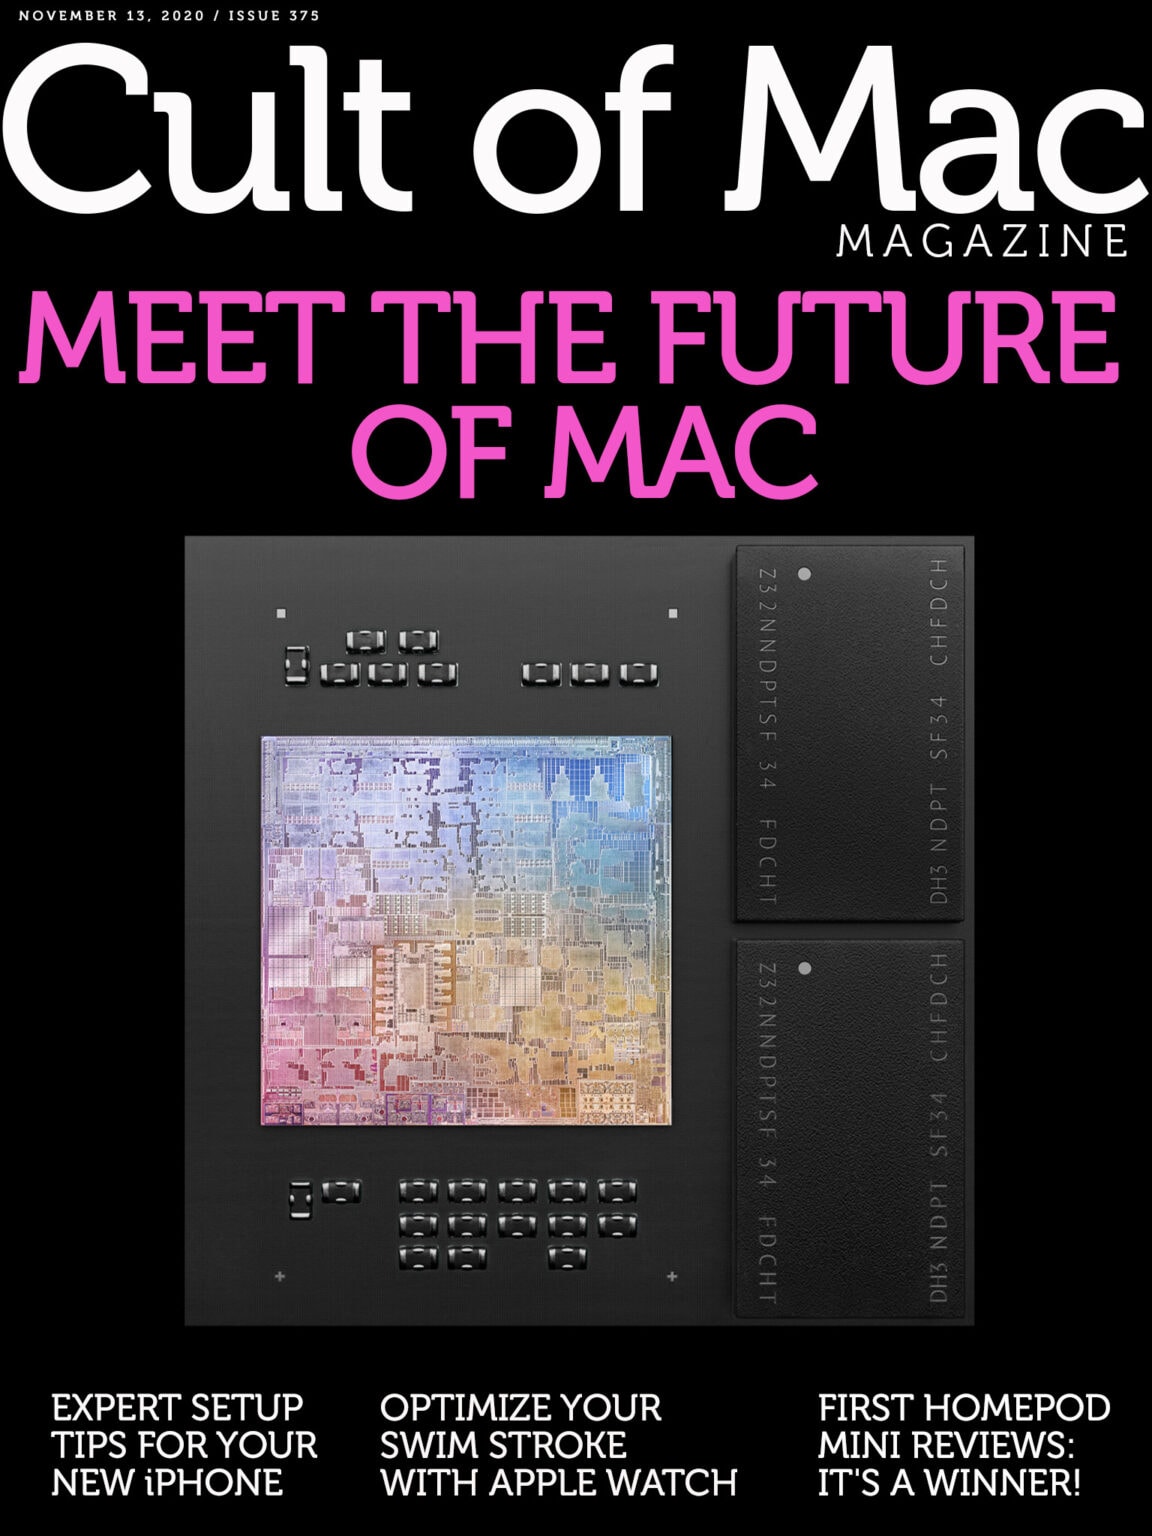 From macOS Big Sur to the might M1 chip, this week was all about the Mac.